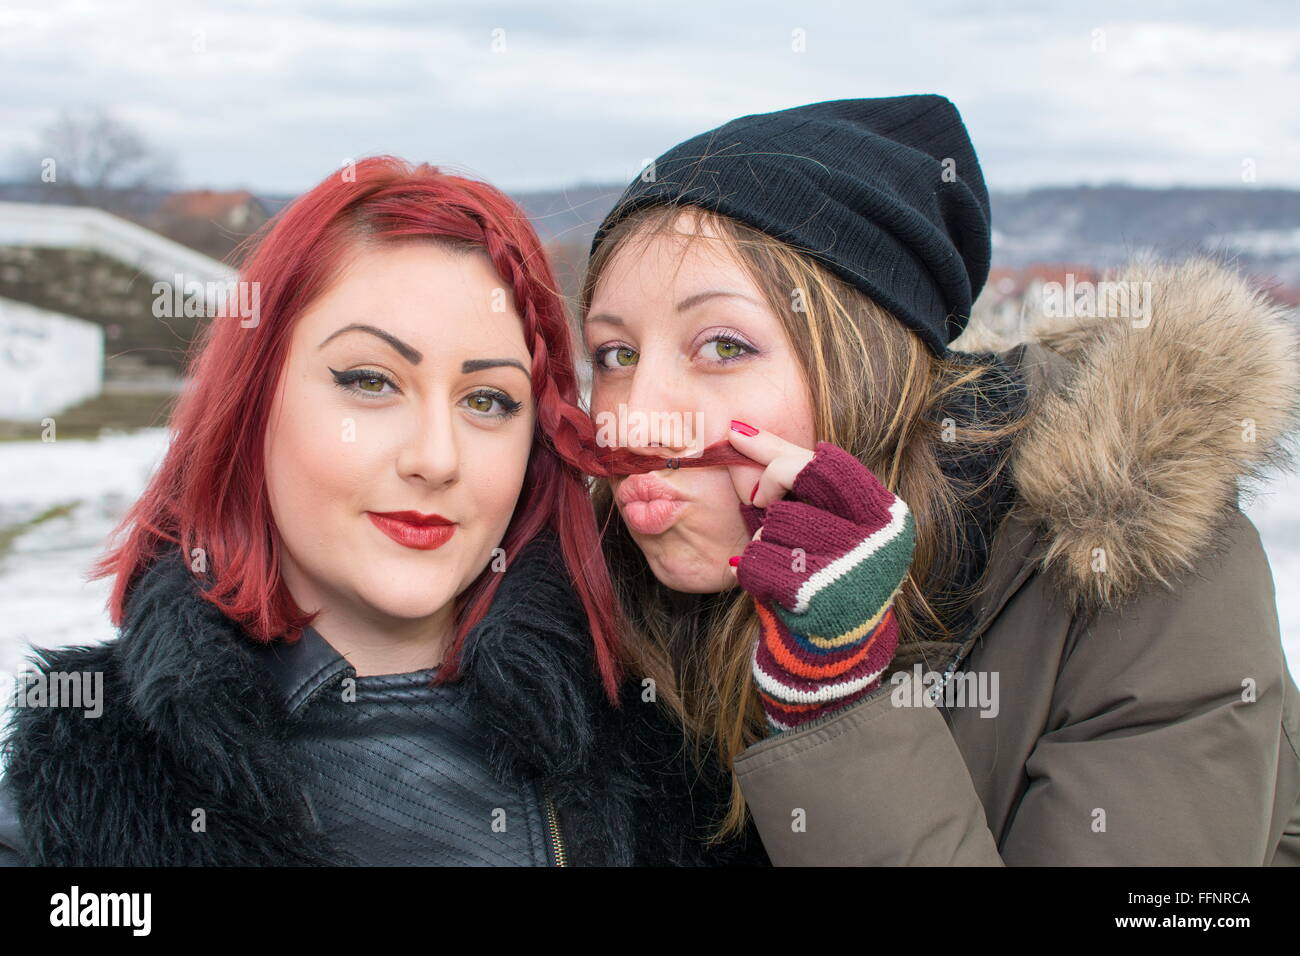 two girls having fun in the winter weather, one girl is making a mustache with her hair Stock Photo